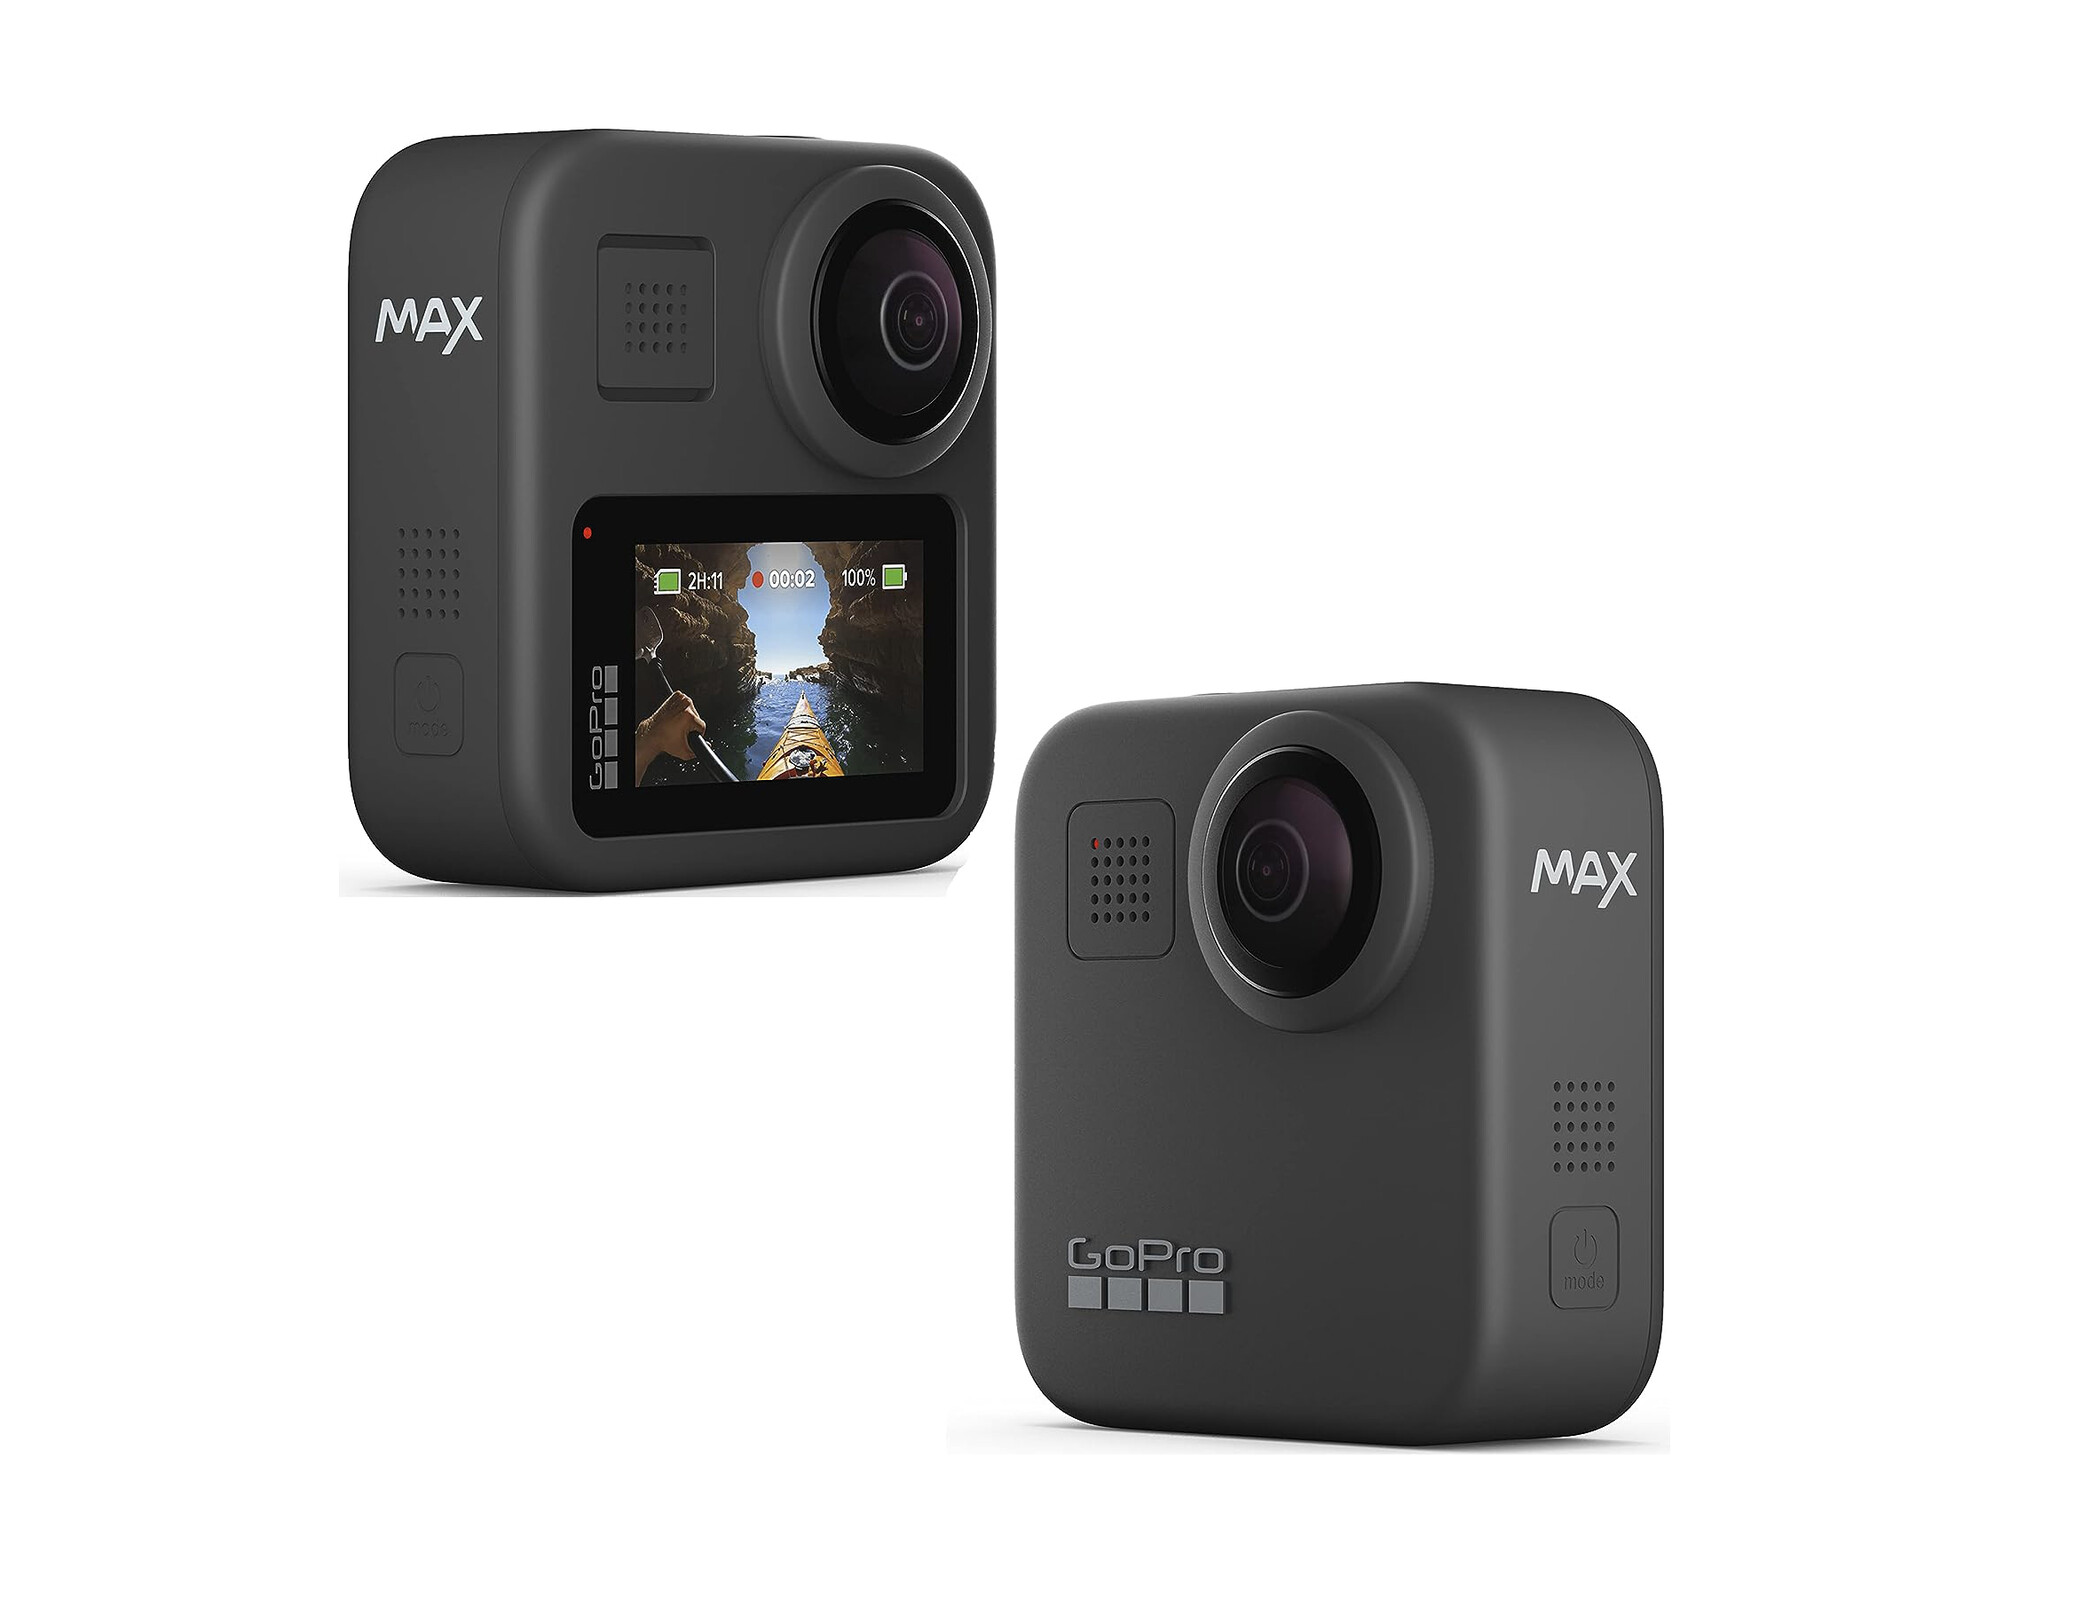 GoPro MAX 2.0 teased as new 360-degree camera and GoPro Max